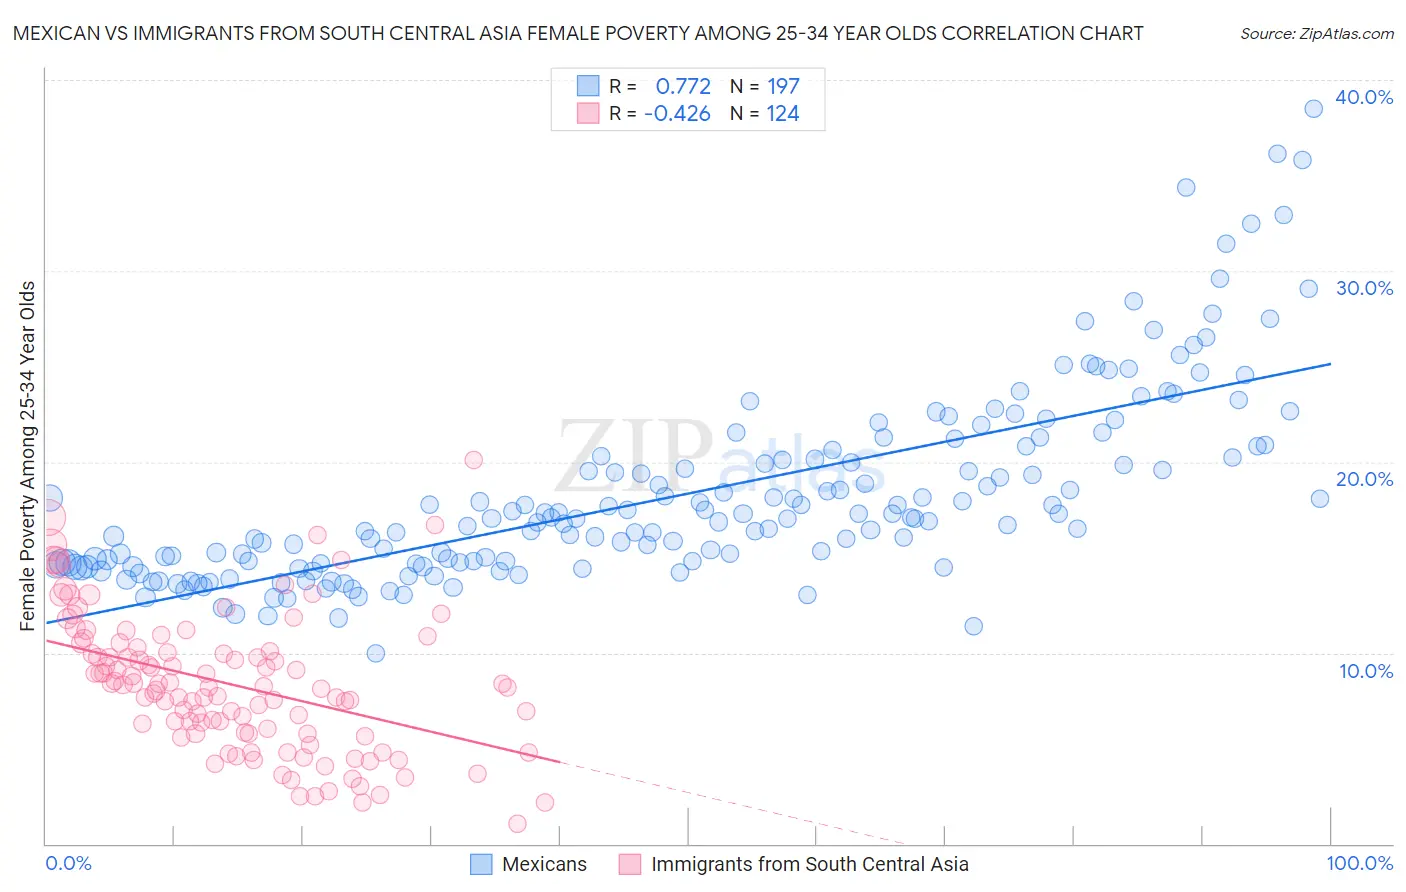 Mexican vs Immigrants from South Central Asia Female Poverty Among 25-34 Year Olds